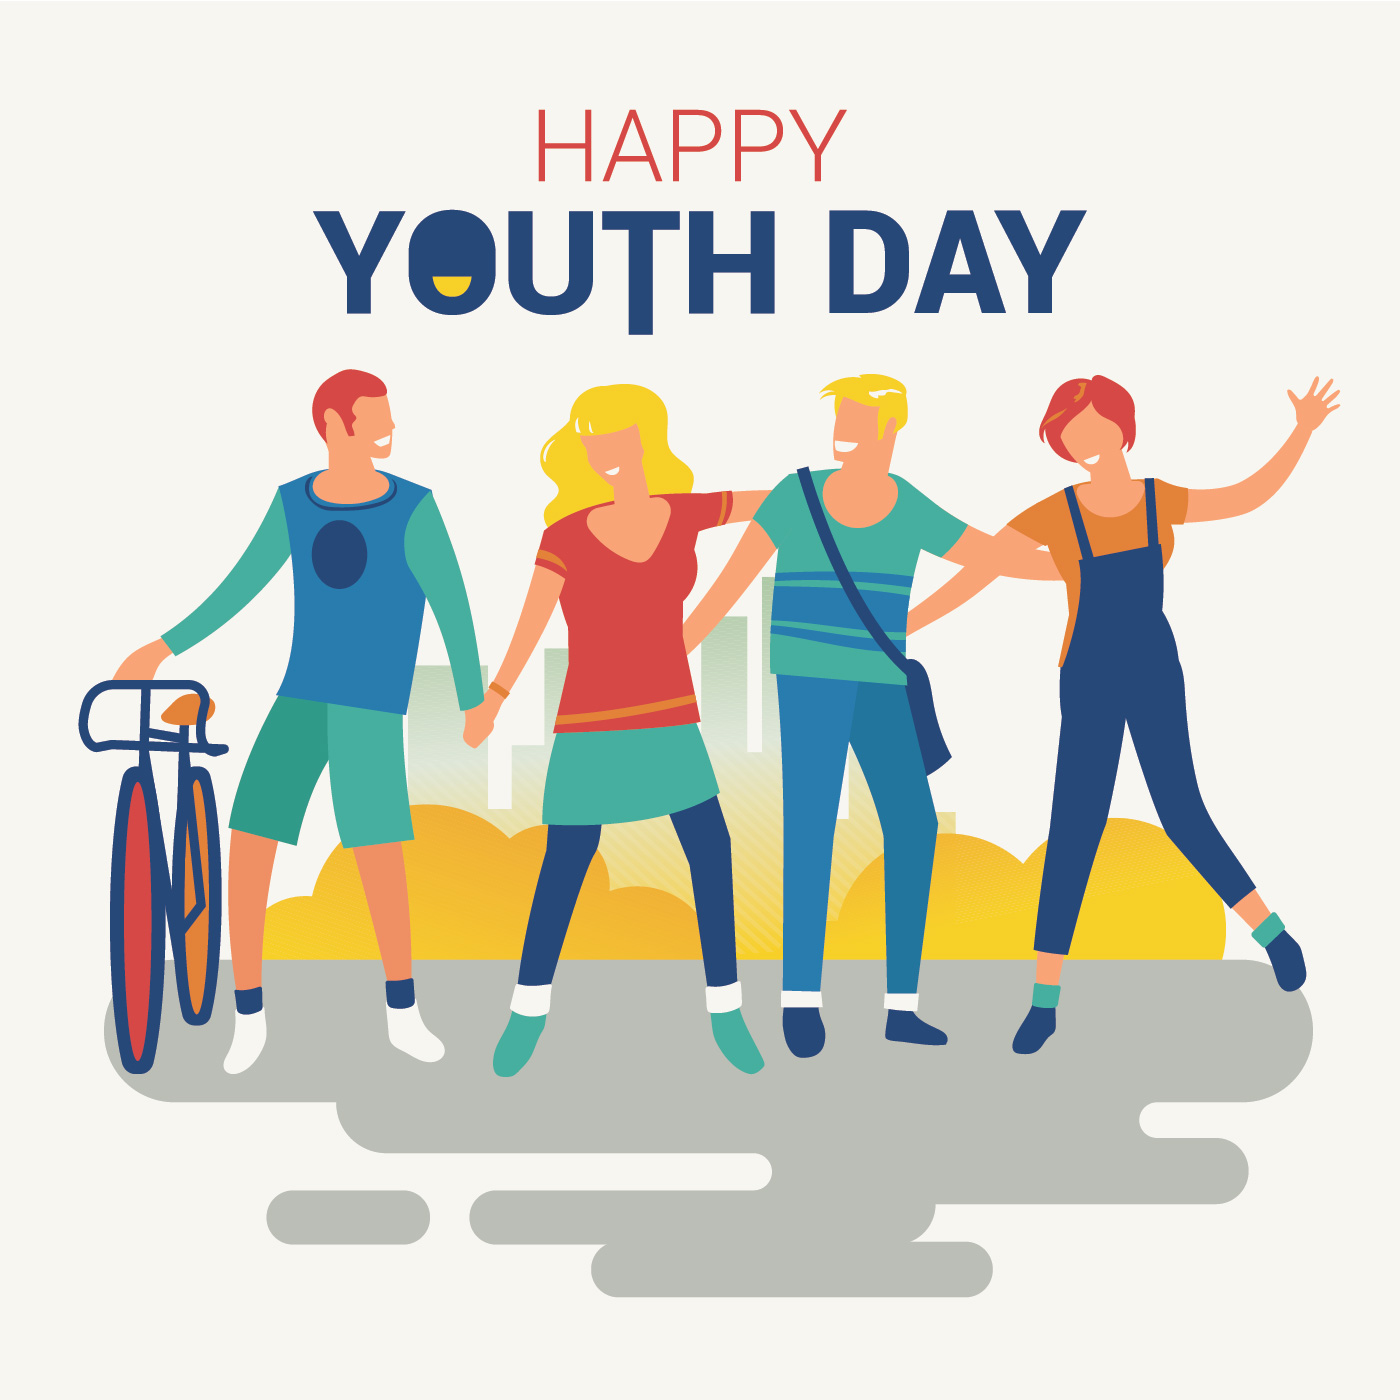 research on youth day